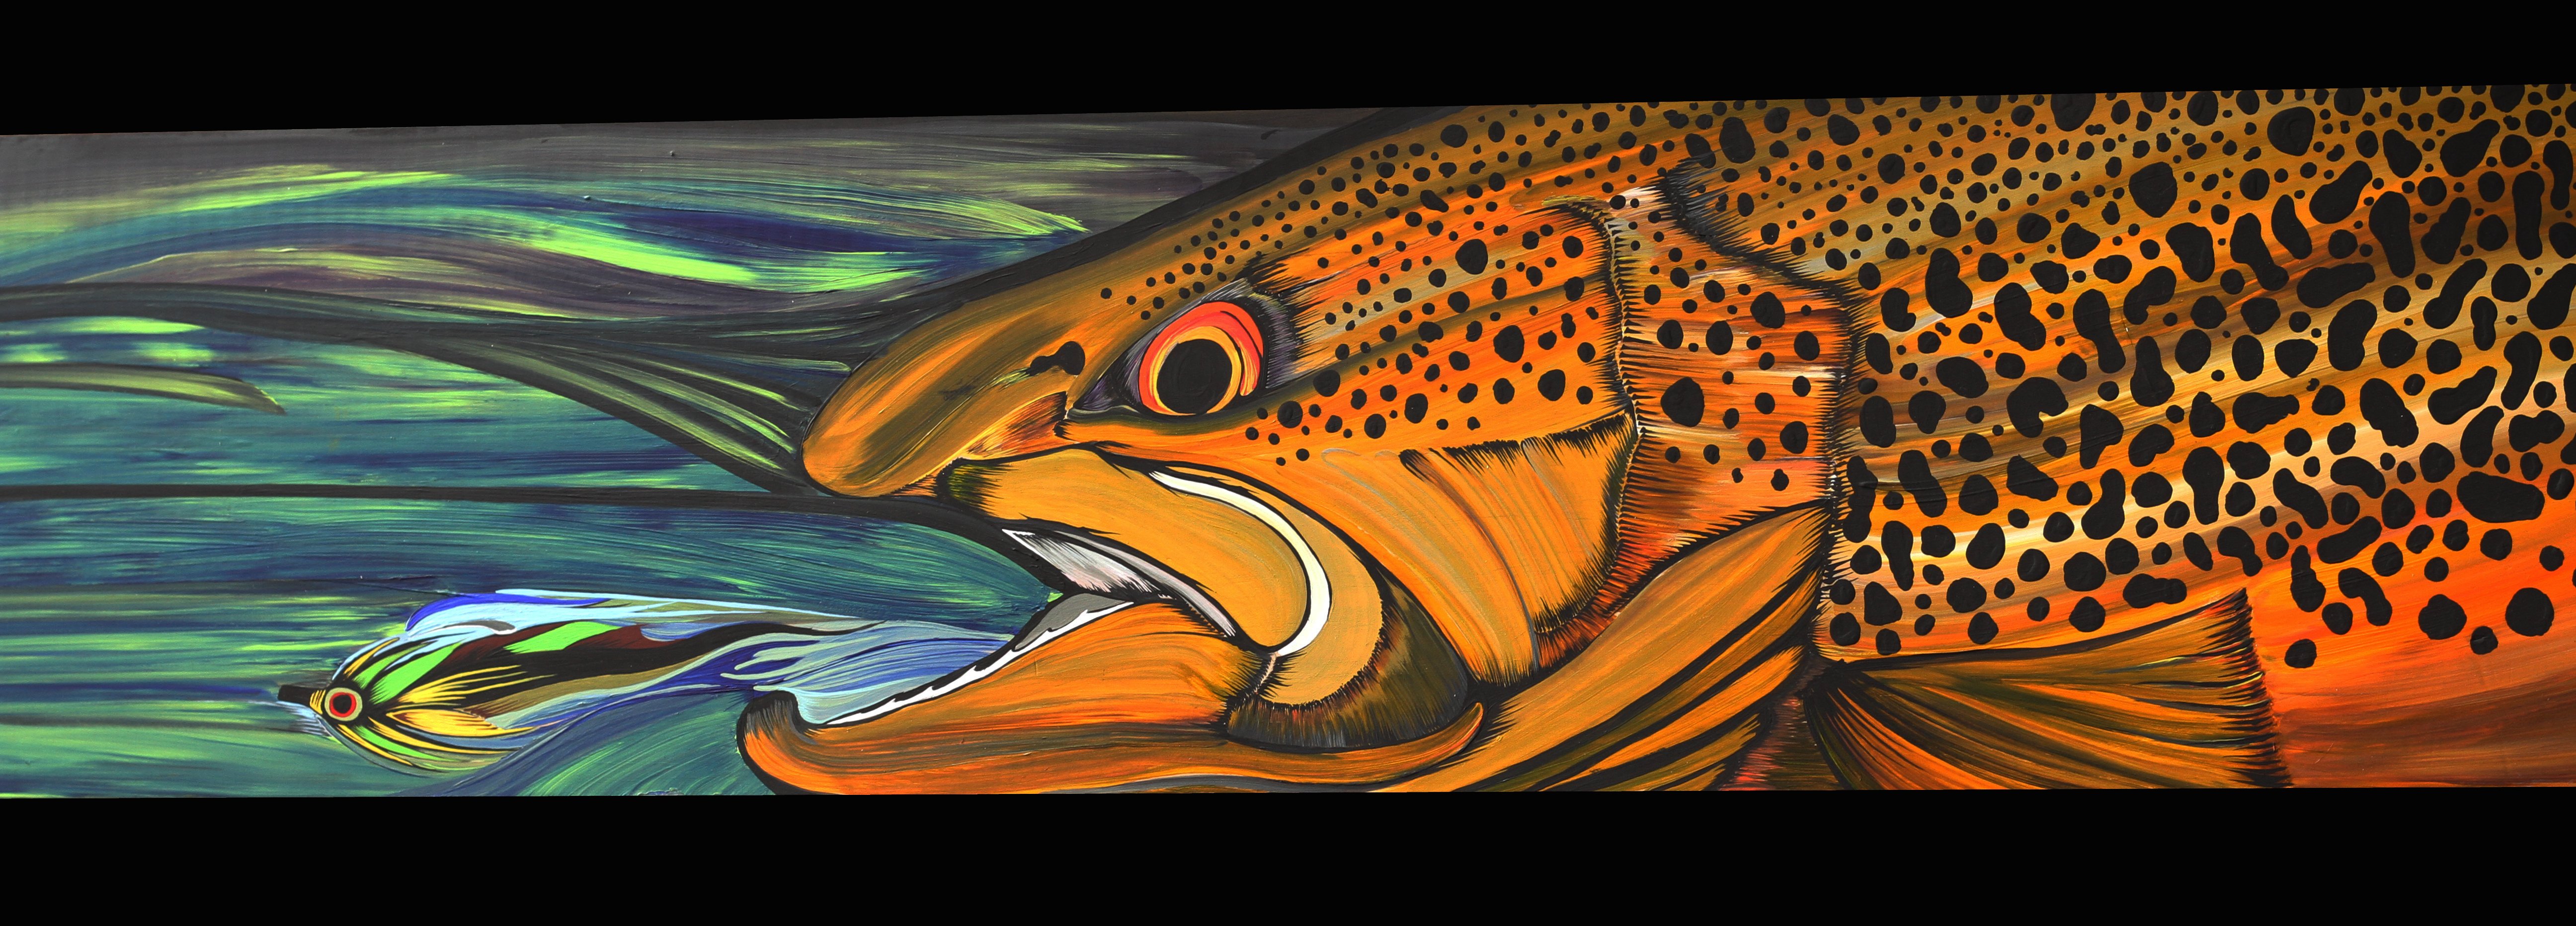 fishing, Fish, Sport, Fishes, Bass, Trout, Artwork, Painting Wallpaper HD / Desktop and Mobile Background